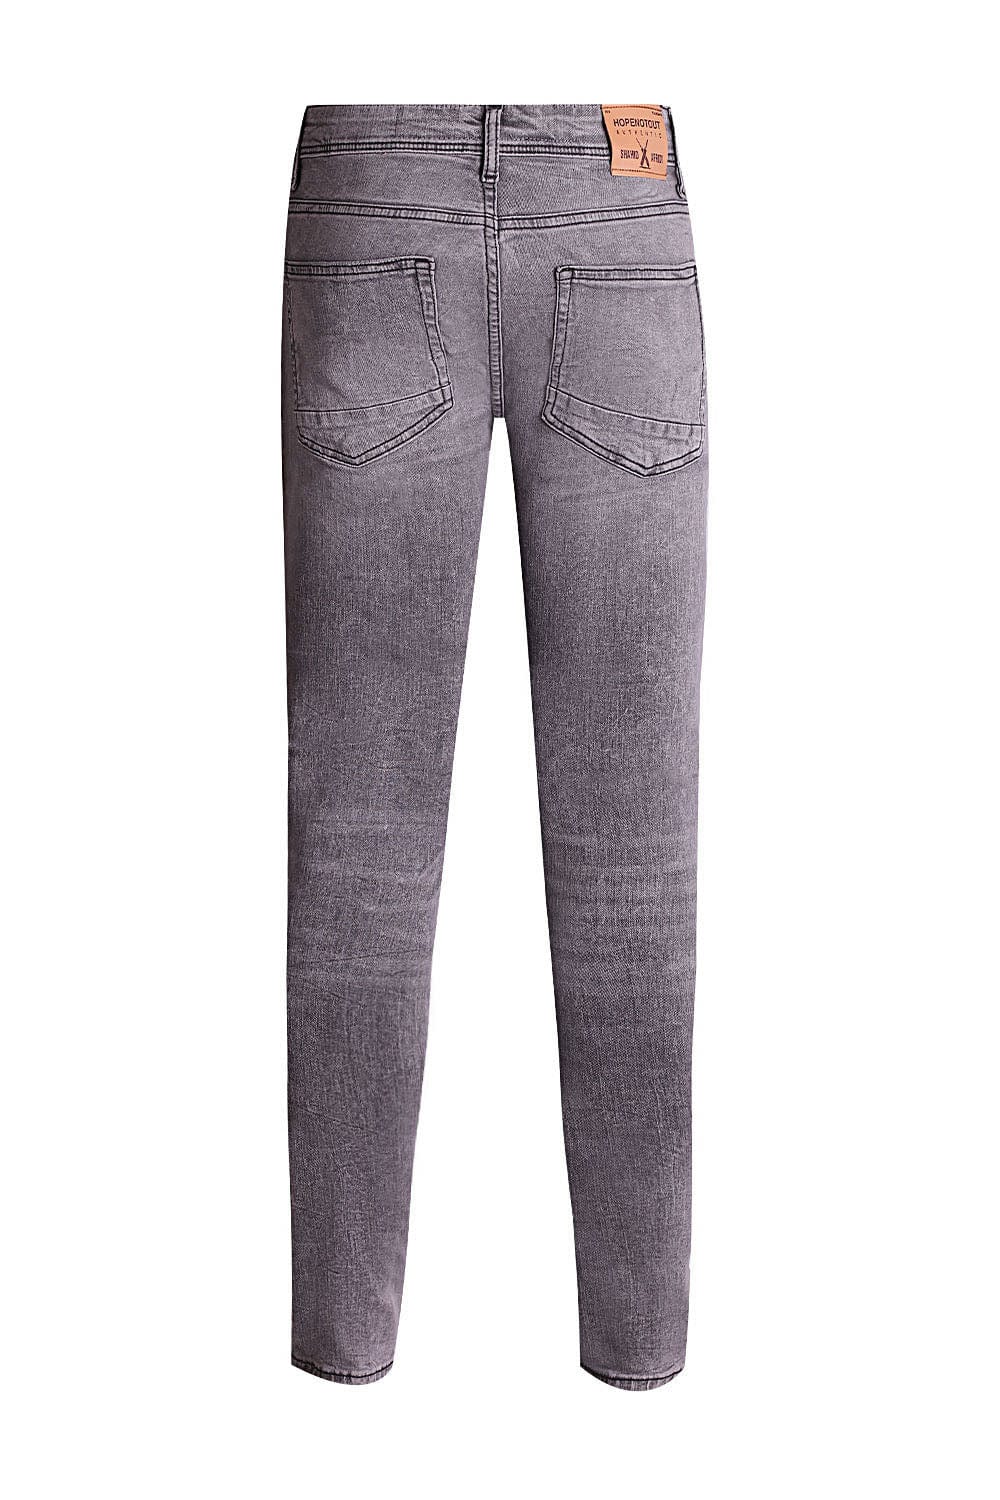 Hope Not Out by Shahid Afridi Men Jeans Premium Stone Wash Slim Fit Ripped Jeans